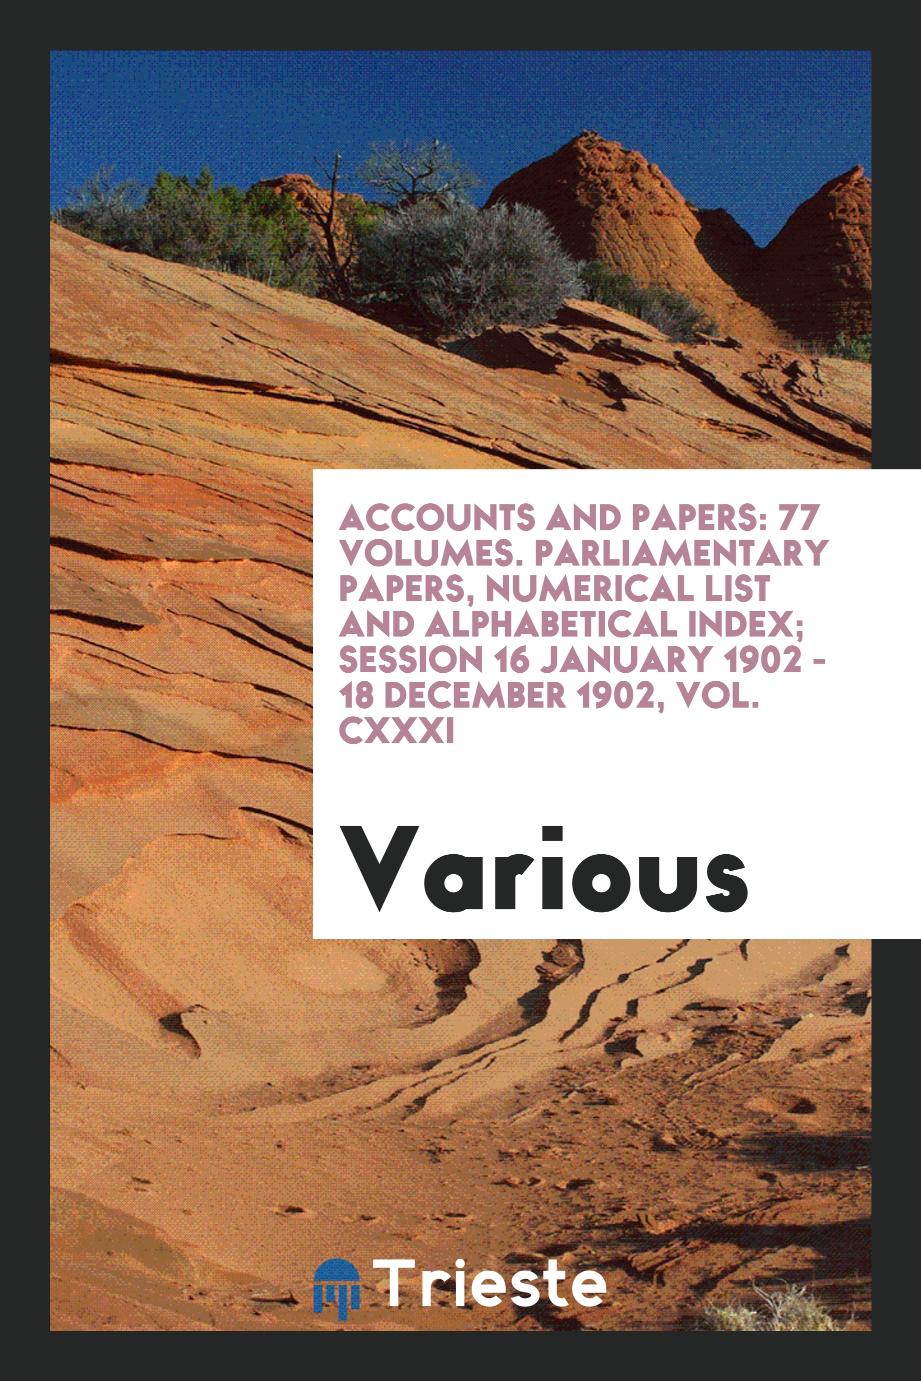 Accounts and Papers: 77 Volumes. Parliamentary Papers, Numerical List and Alphabetical Index; Session 16 January 1902 - 18 December 1902, Vol. CXXXI